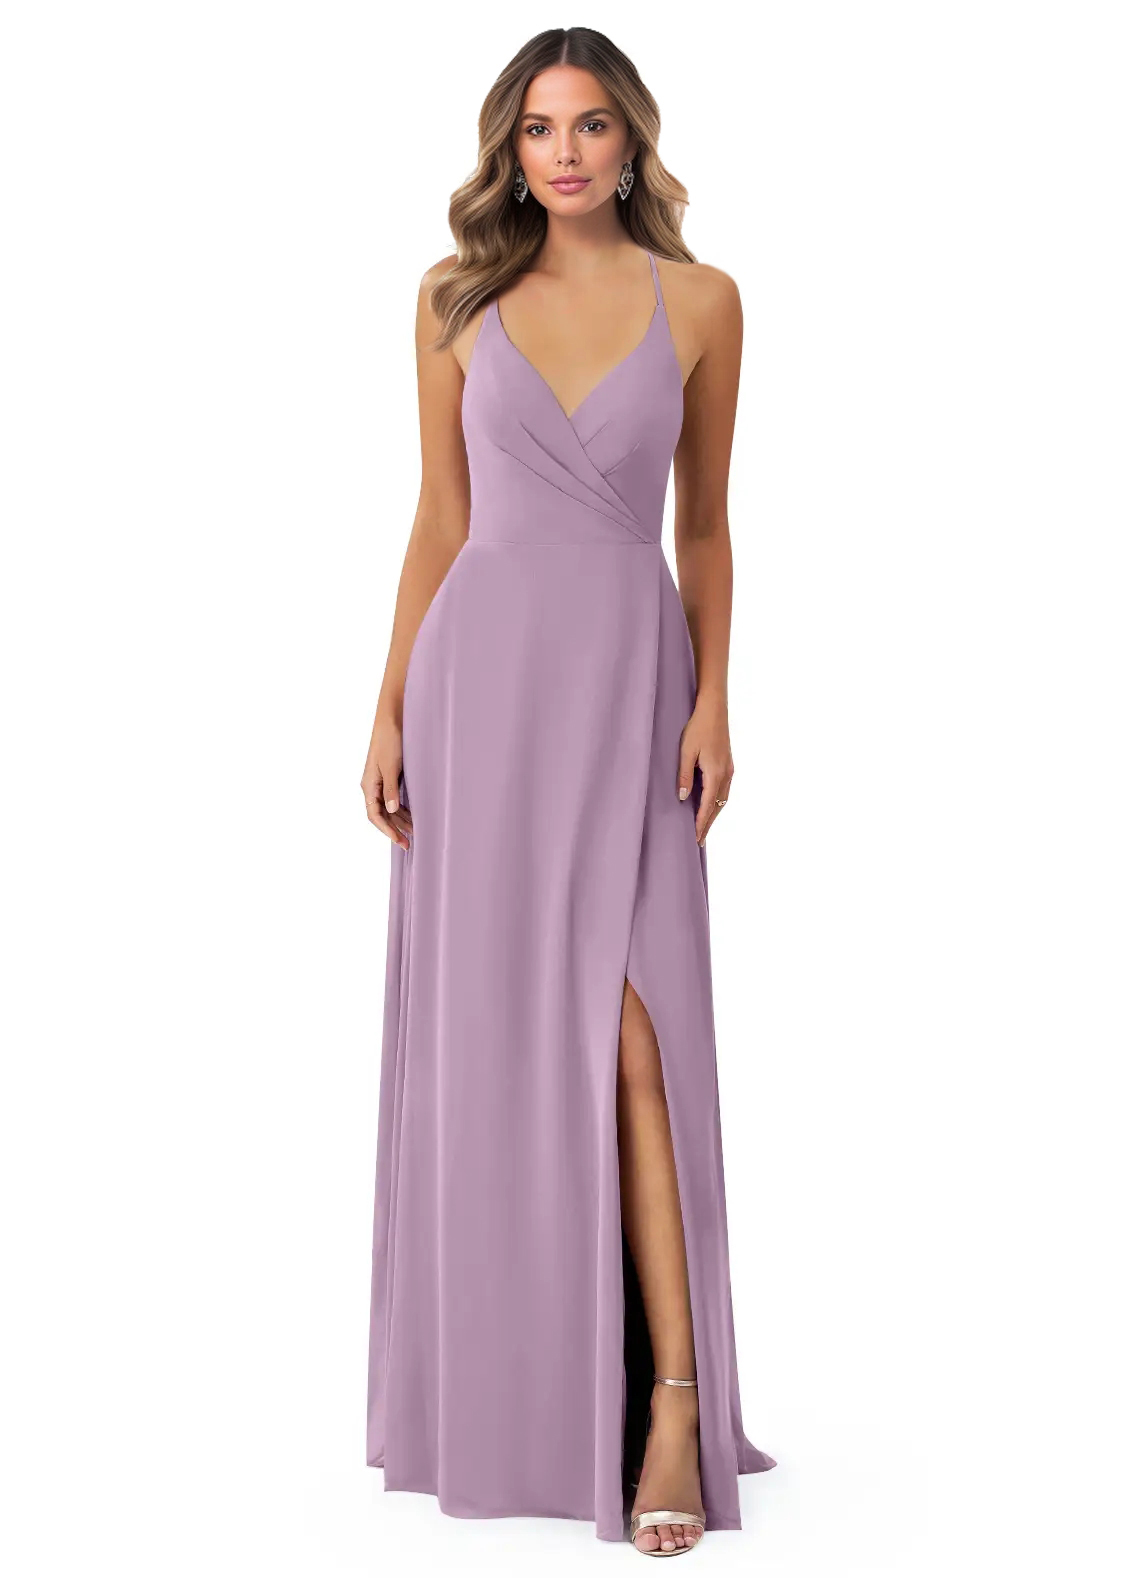 Open Back Chiffon Bridesmaid Dresses With Split Front